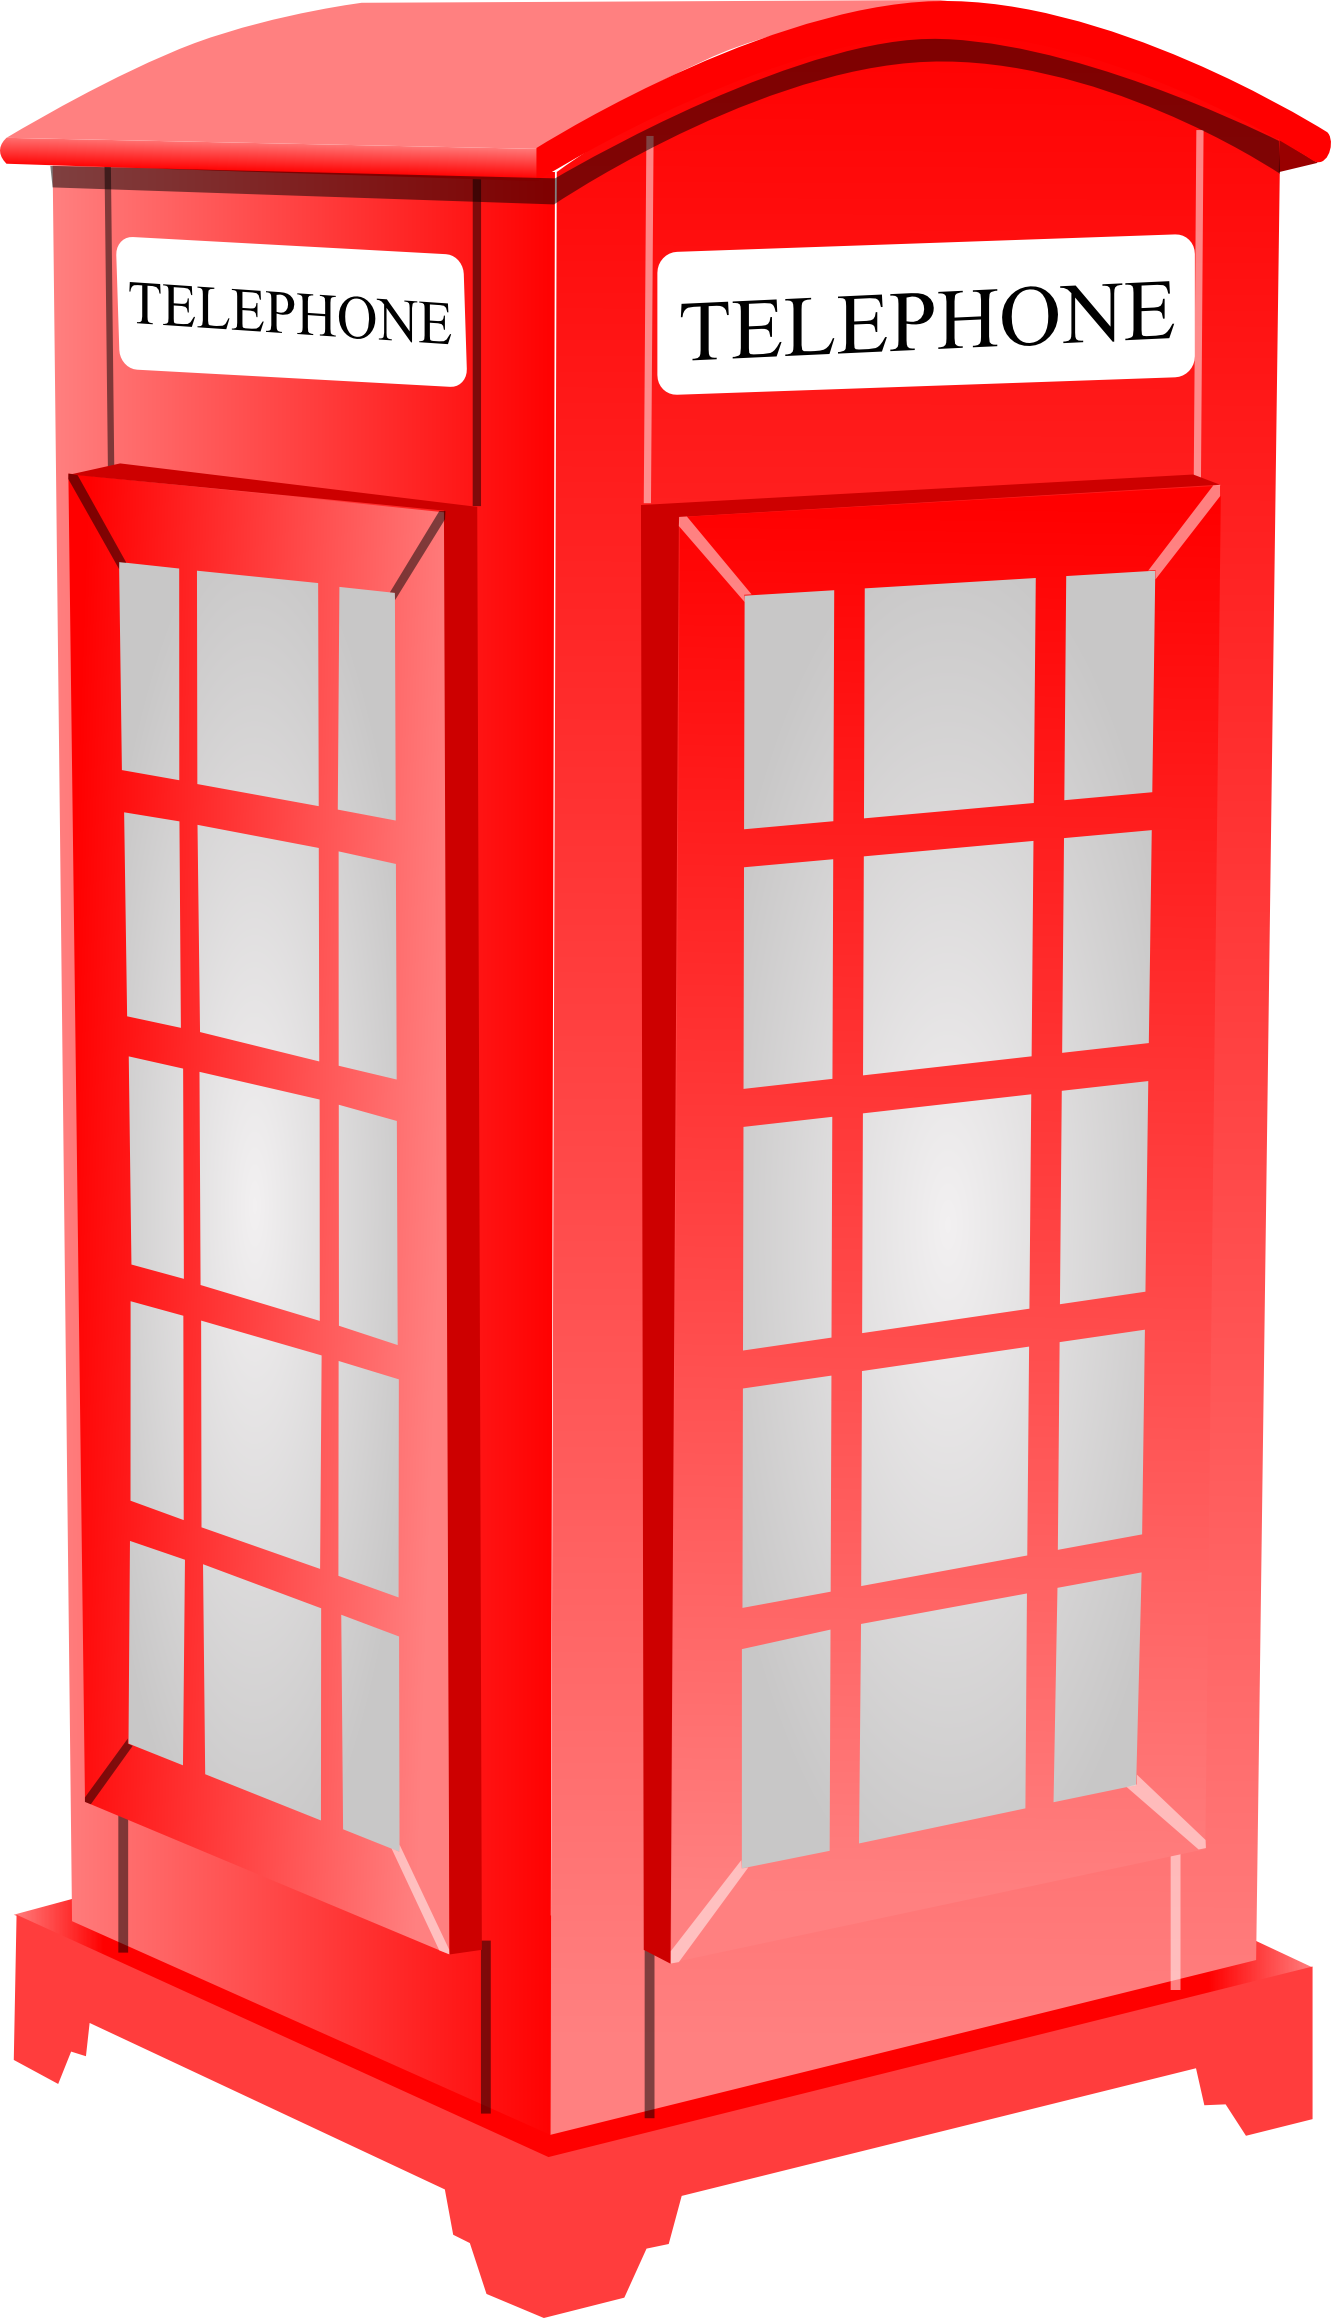 Clip Art: British Phone Booth 1 may 2011 - ClipArt Best - ClipArt Best